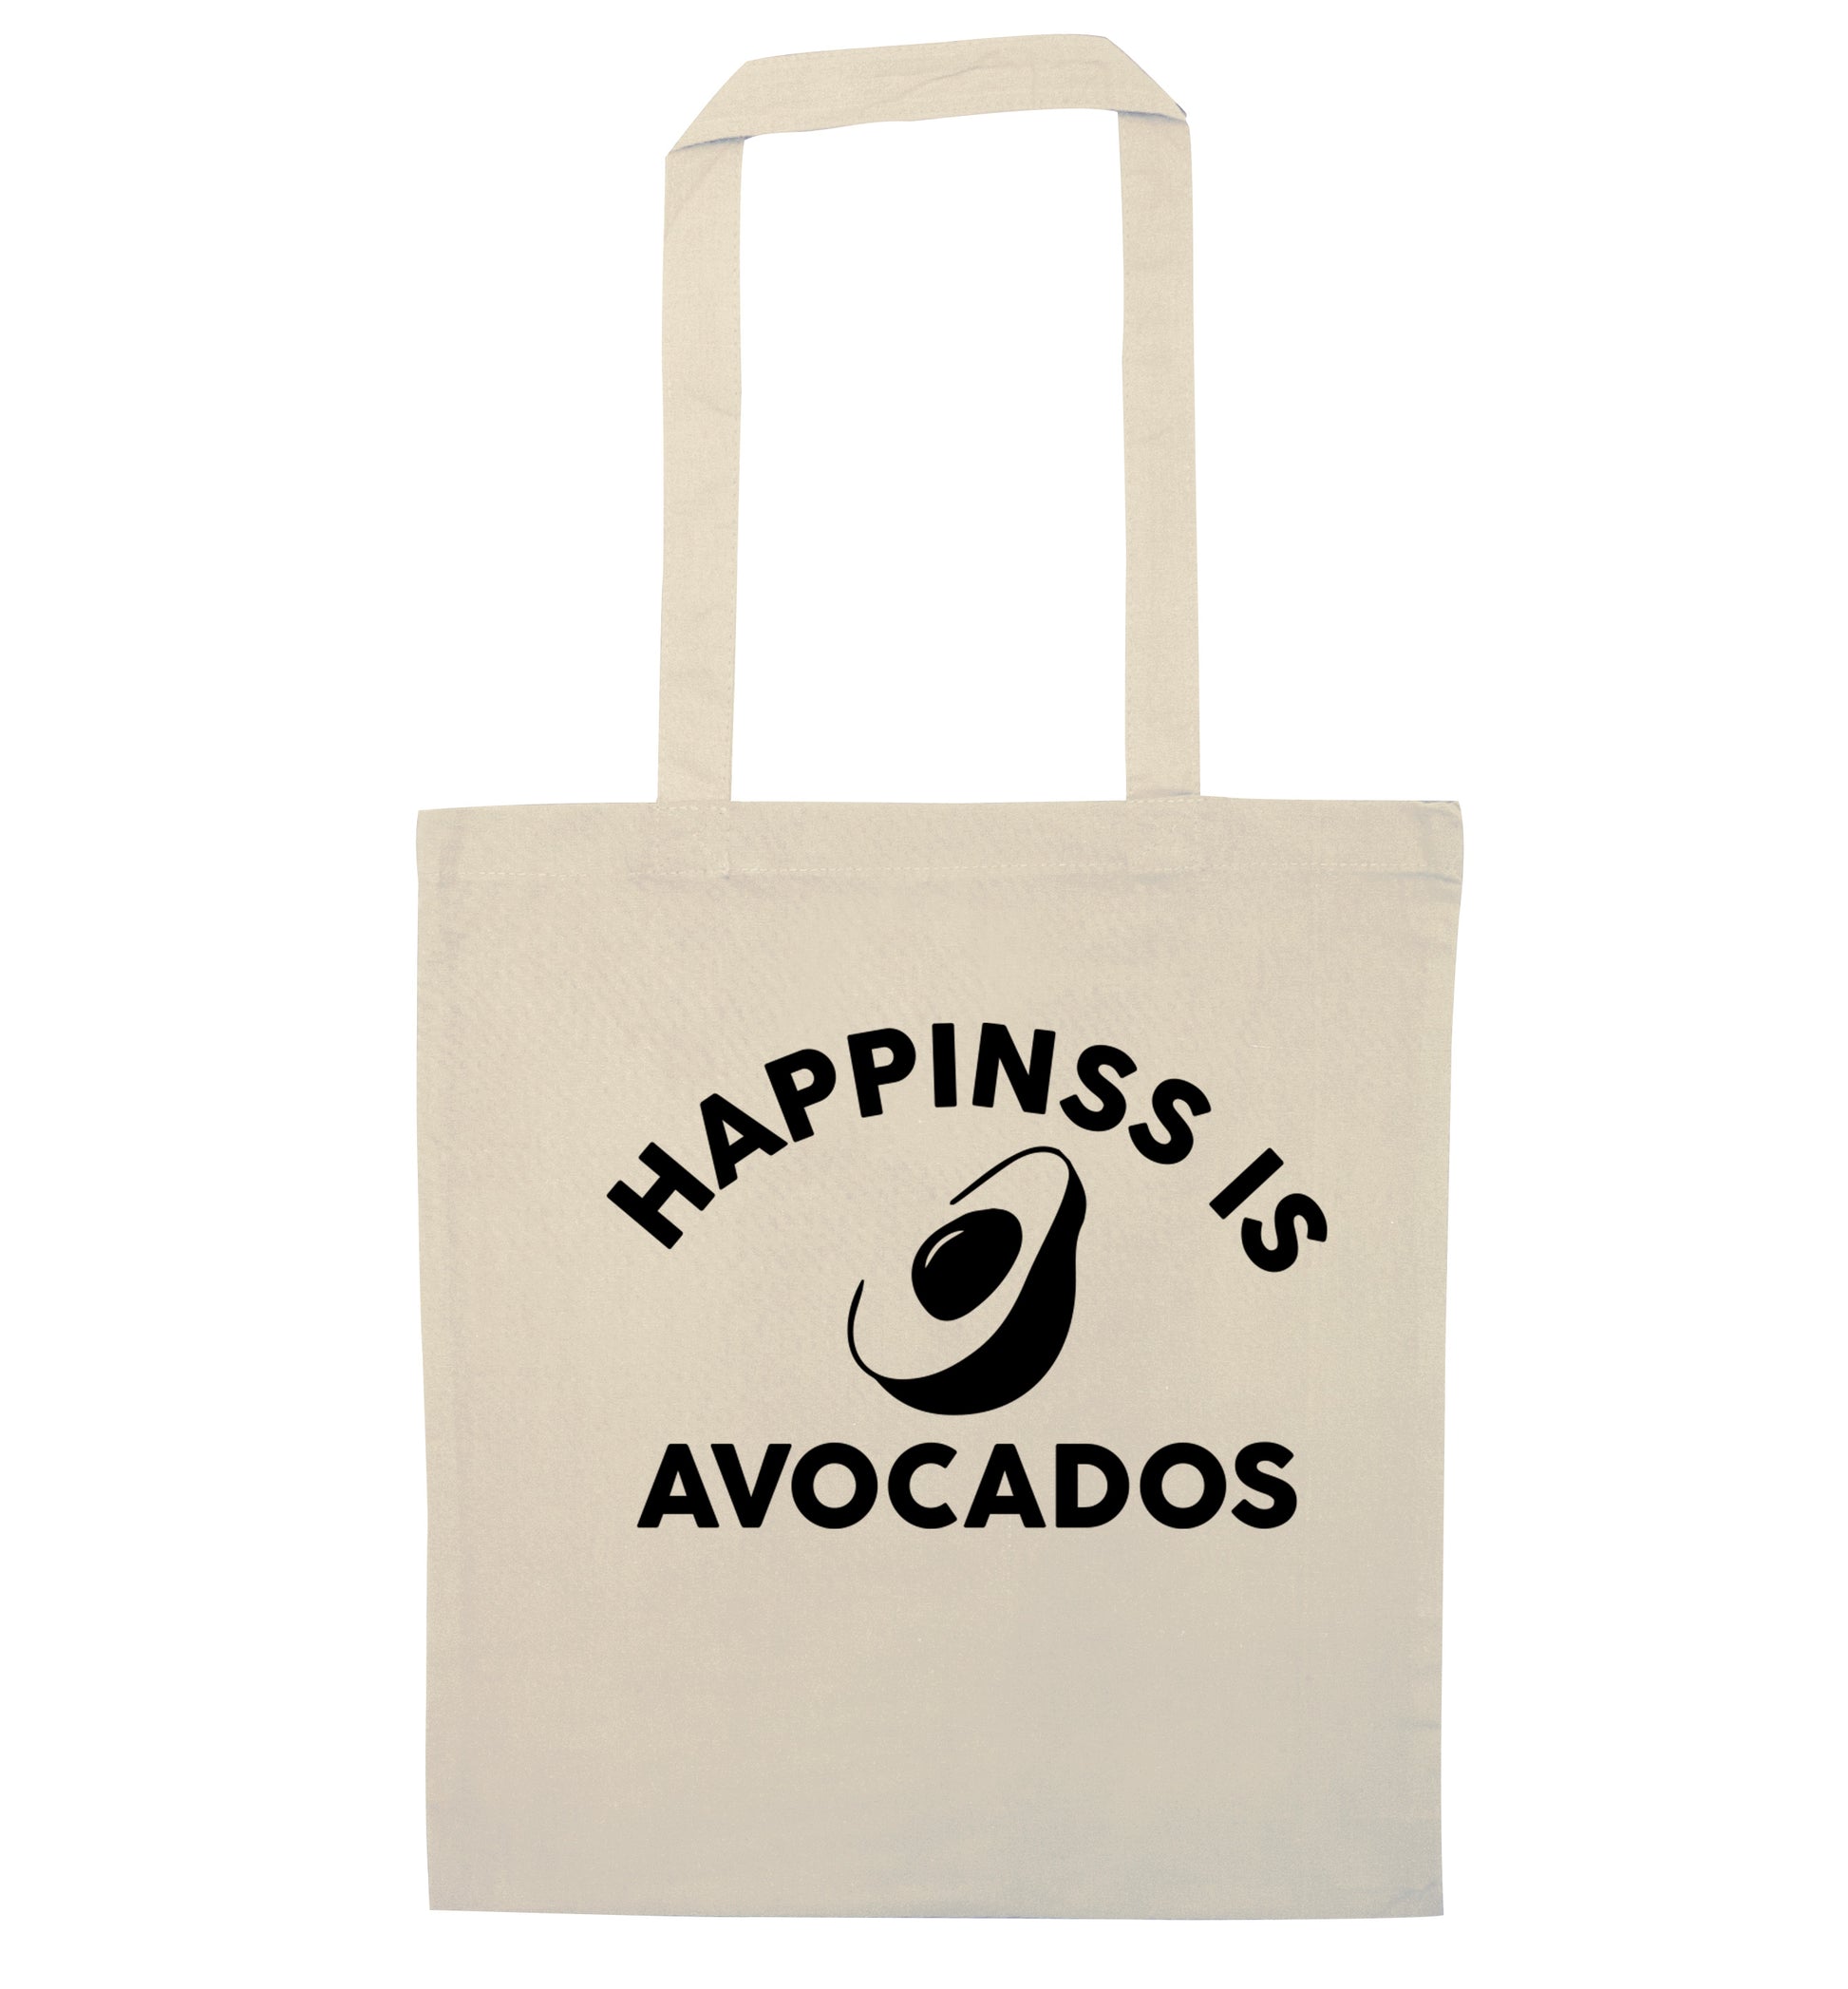 Happiness is avocados natural tote bag